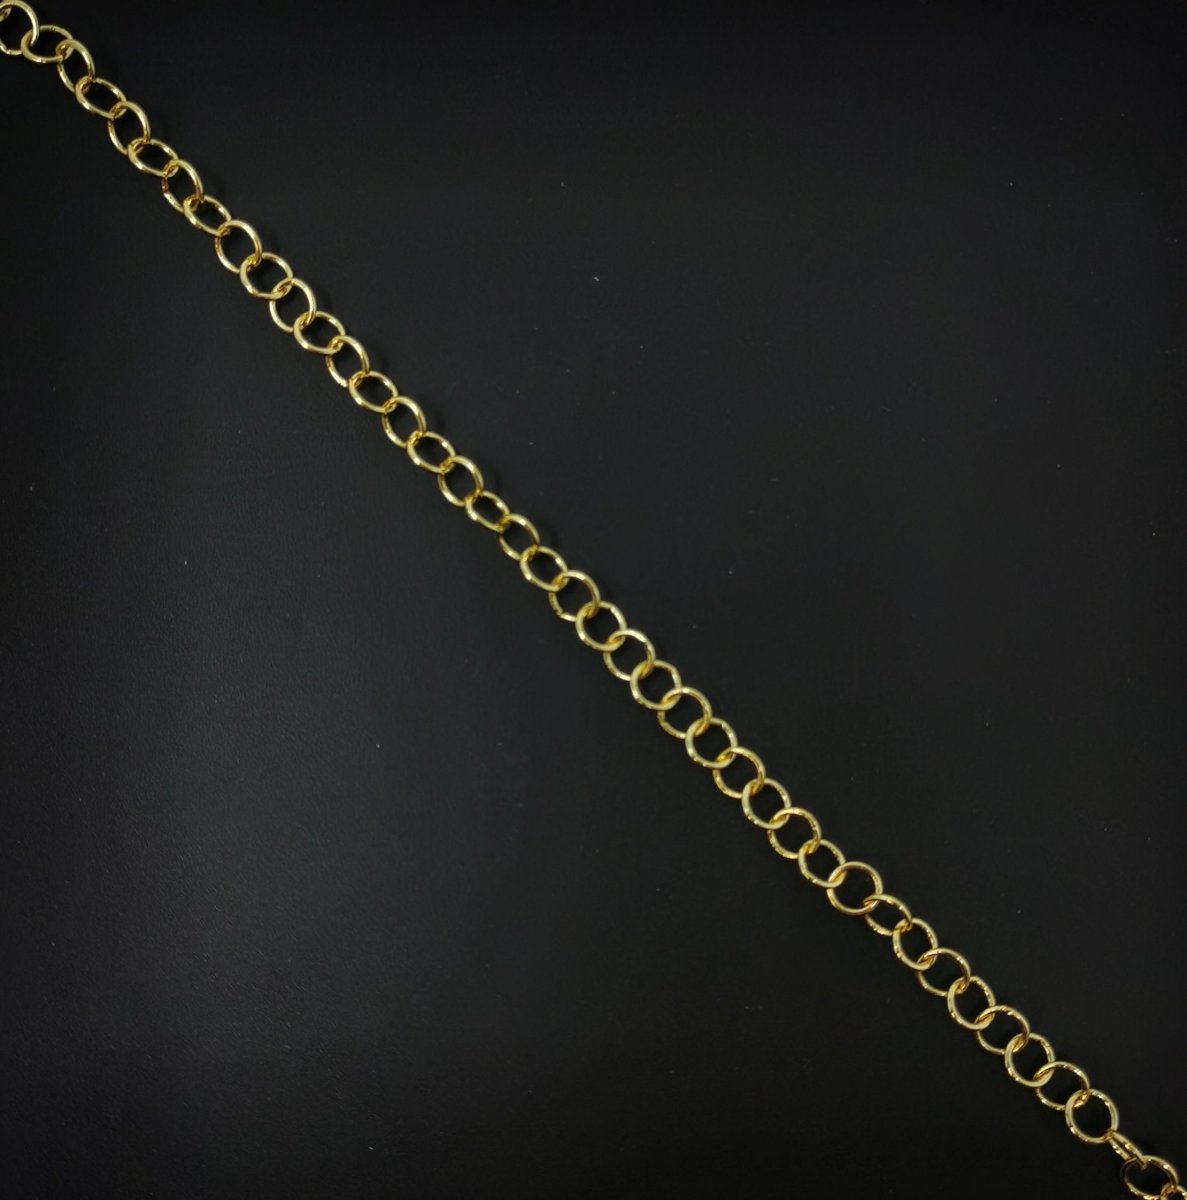 24K Gold Filled ROLO Chain by Yard, 6mm Width, Wholesale Bulk Roll Chain For Jewelry Making, Necklace Bracelet Anklet Component Supply | ROLL-079 Clearance Pricing - DLUXCA